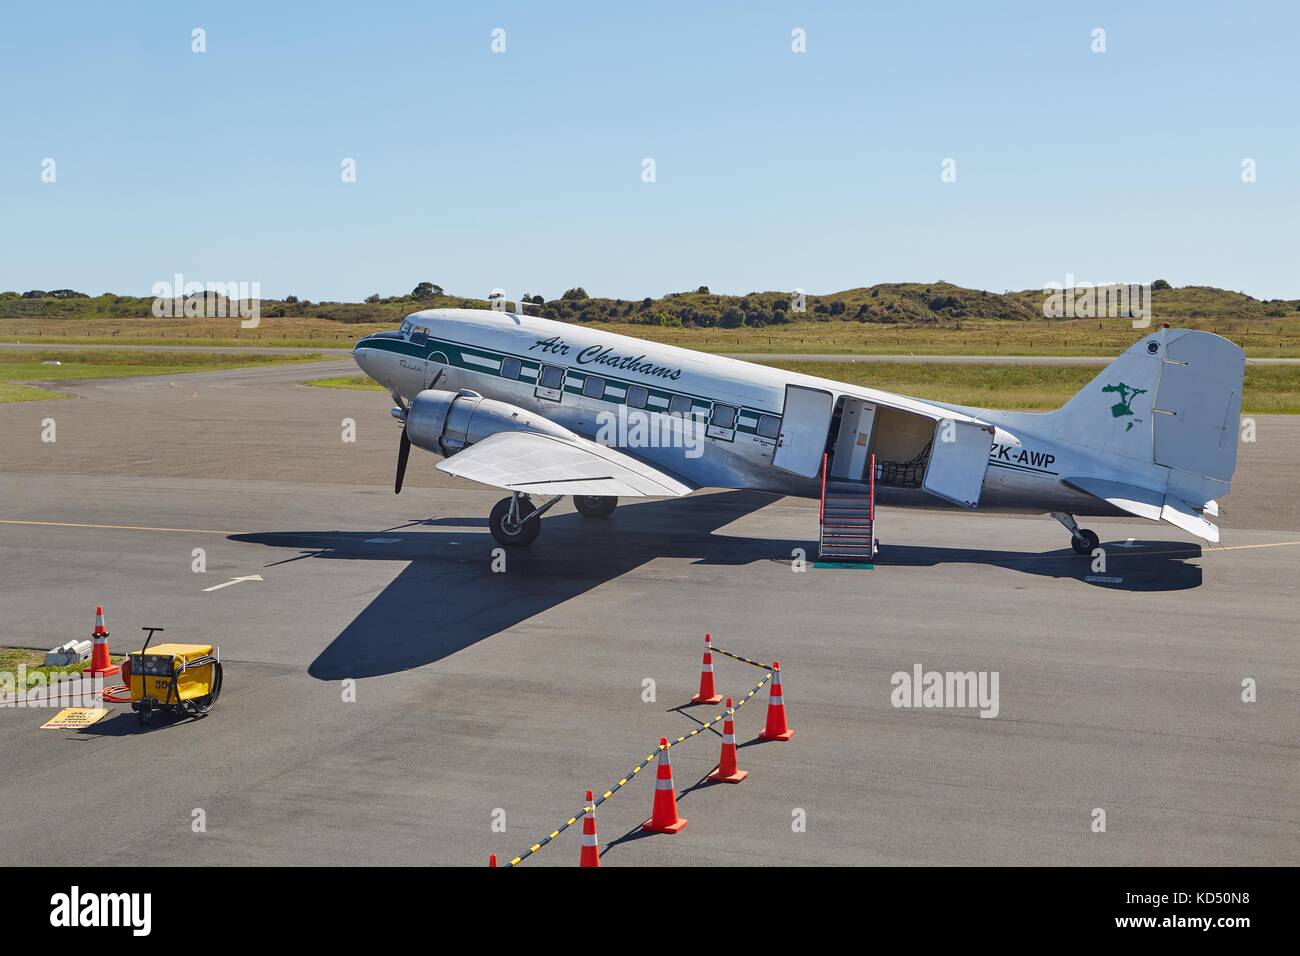 DC-3 at the airport Stock Photo